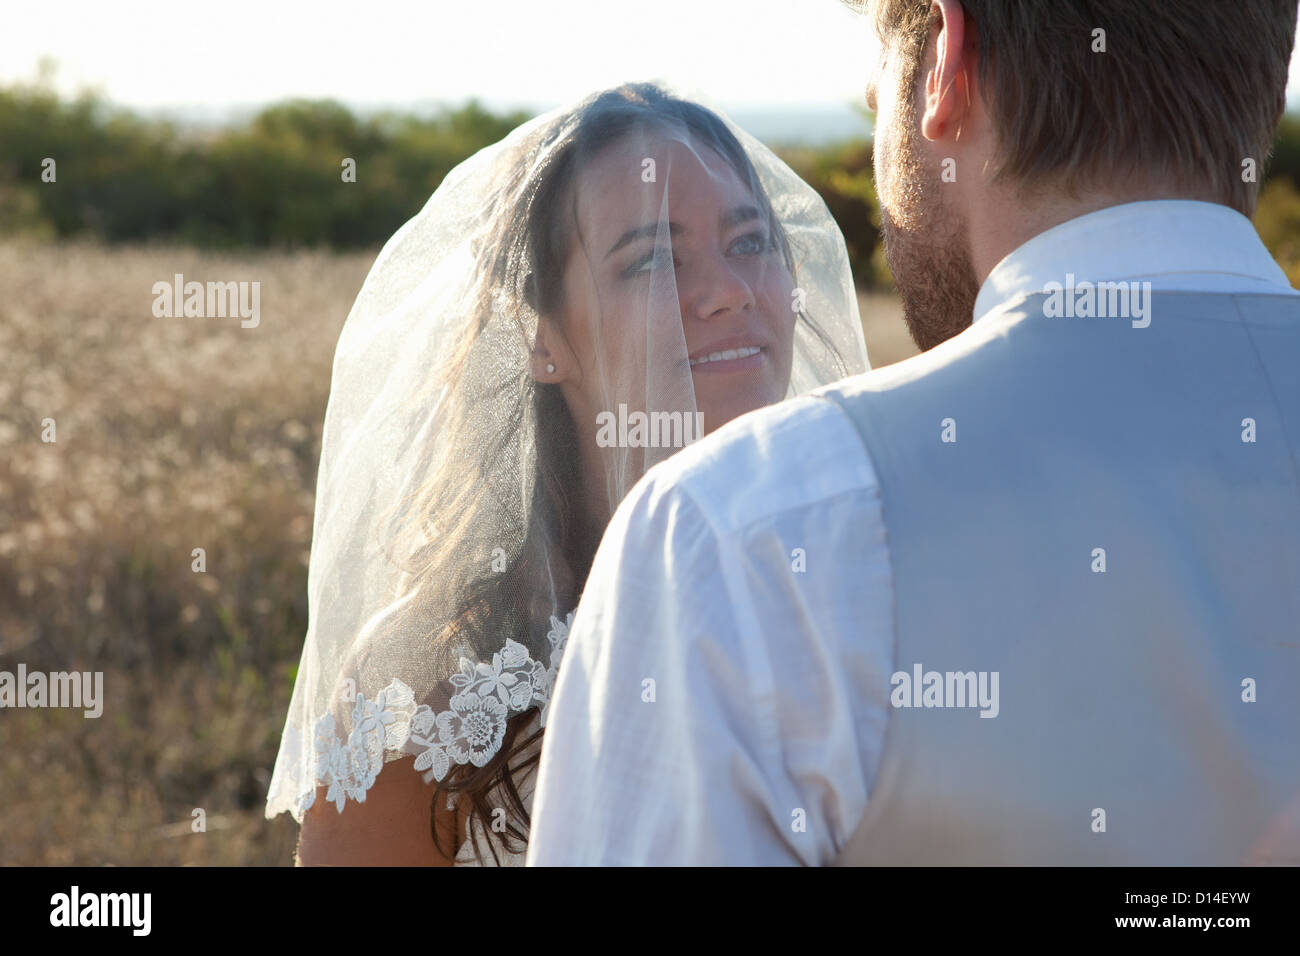 Newlywed couple standing outdoors Stock Photo